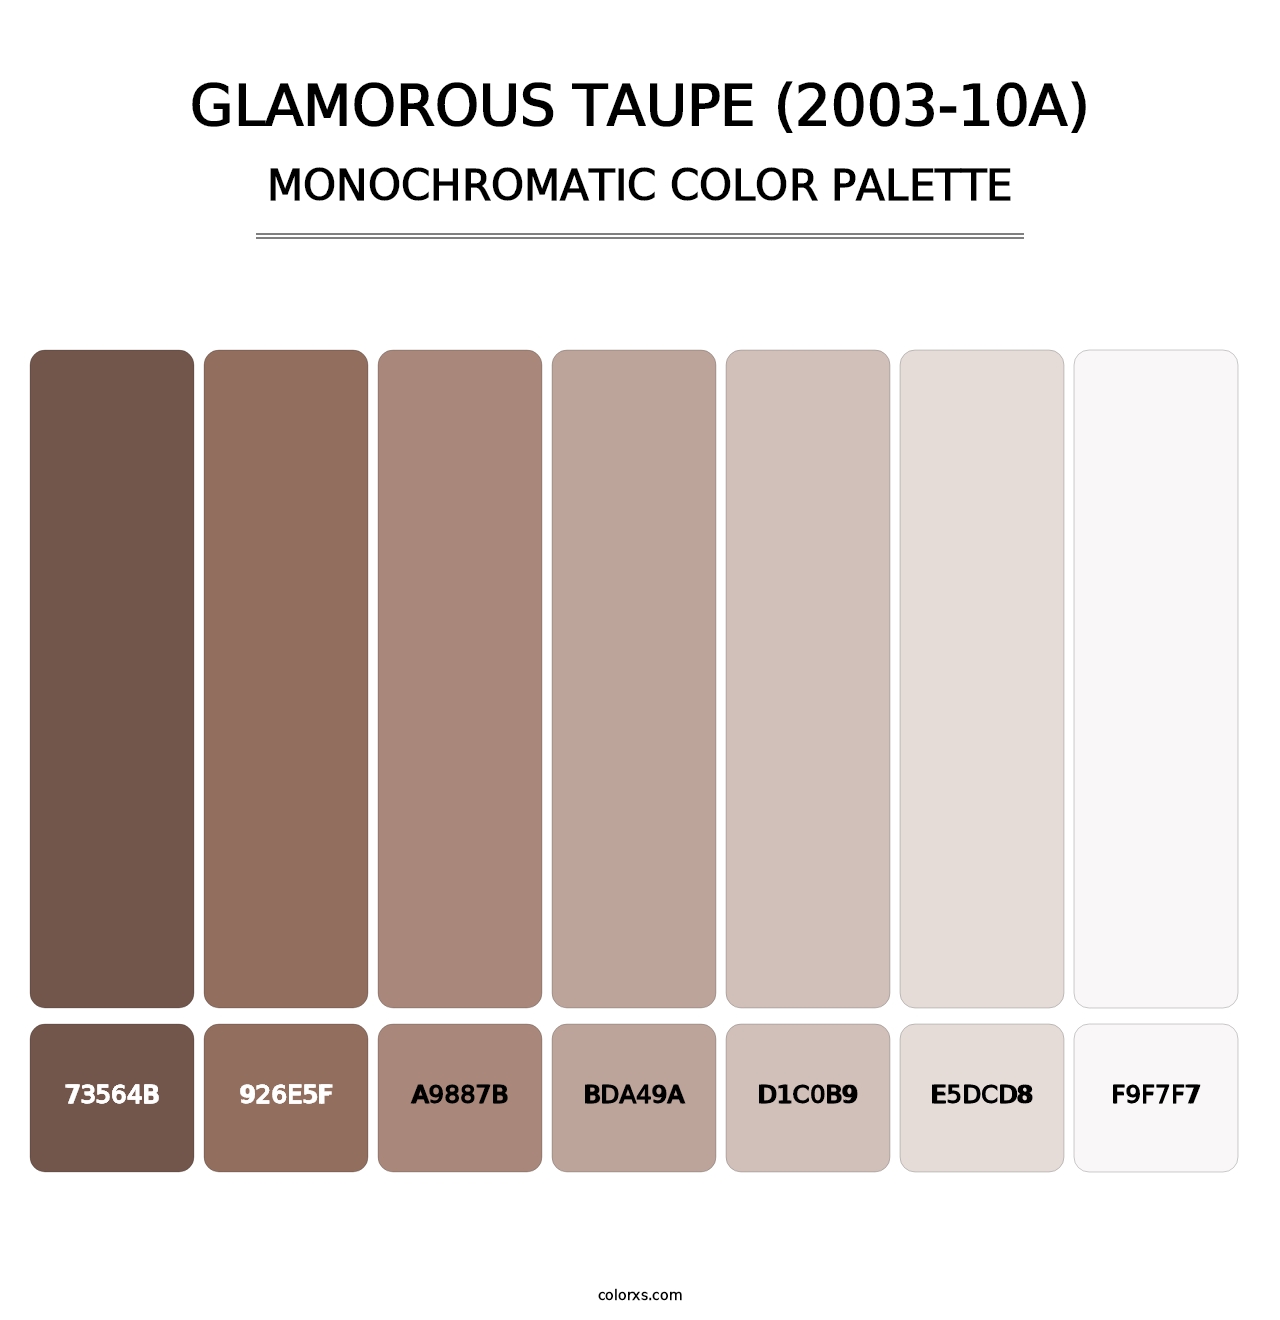 Glamorous Taupe (2003-10A) - Monochromatic Color Palette